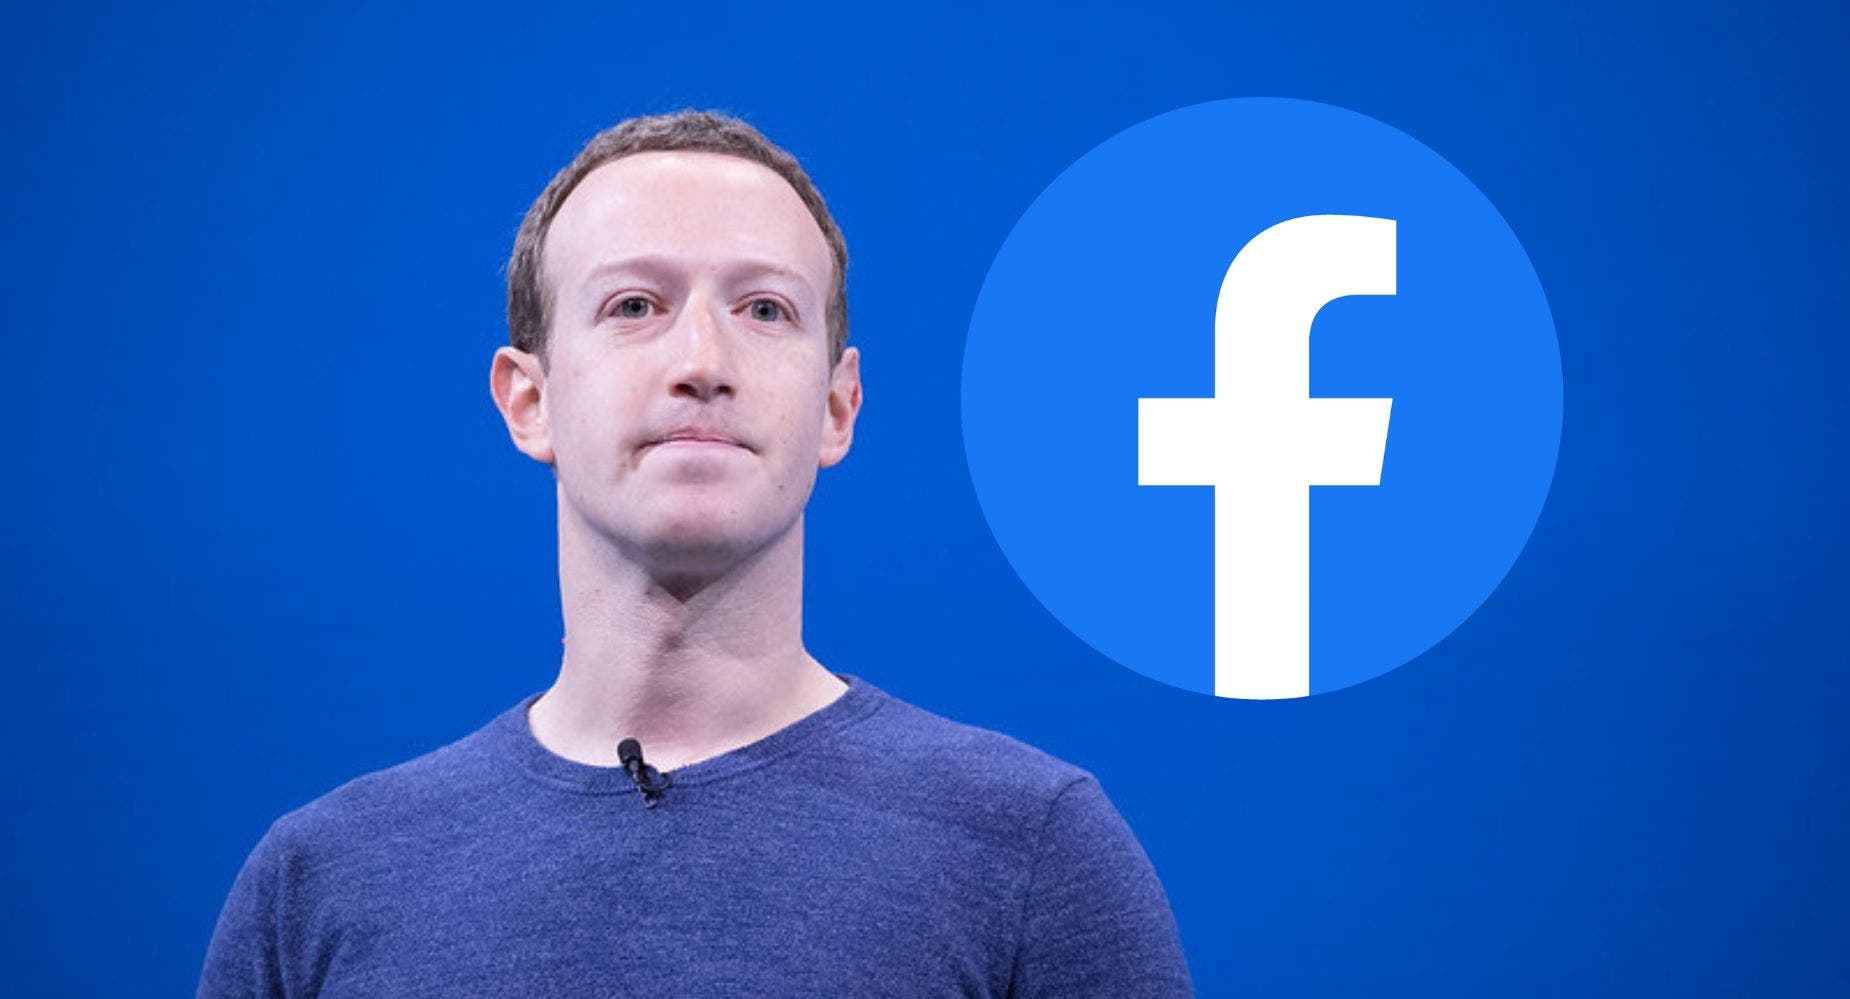 Harvard Expert Says Zuckerberg Is Derailing Facebook: 'I Think The Wealth Went To His Head'